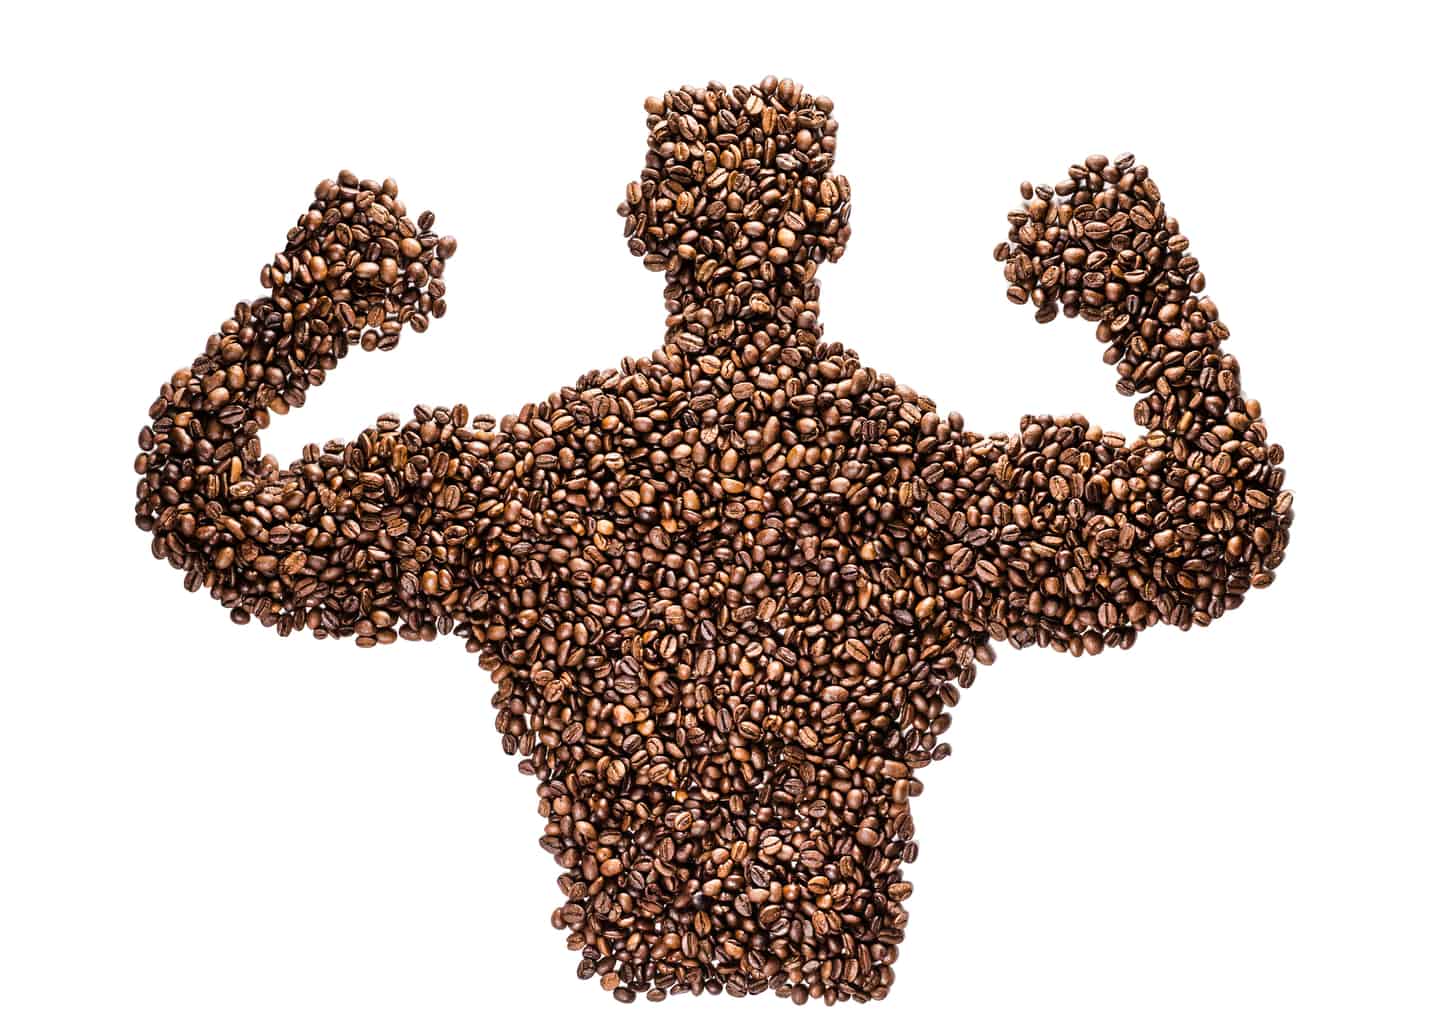 How to Boost Testosterone Levels With... Coffee?